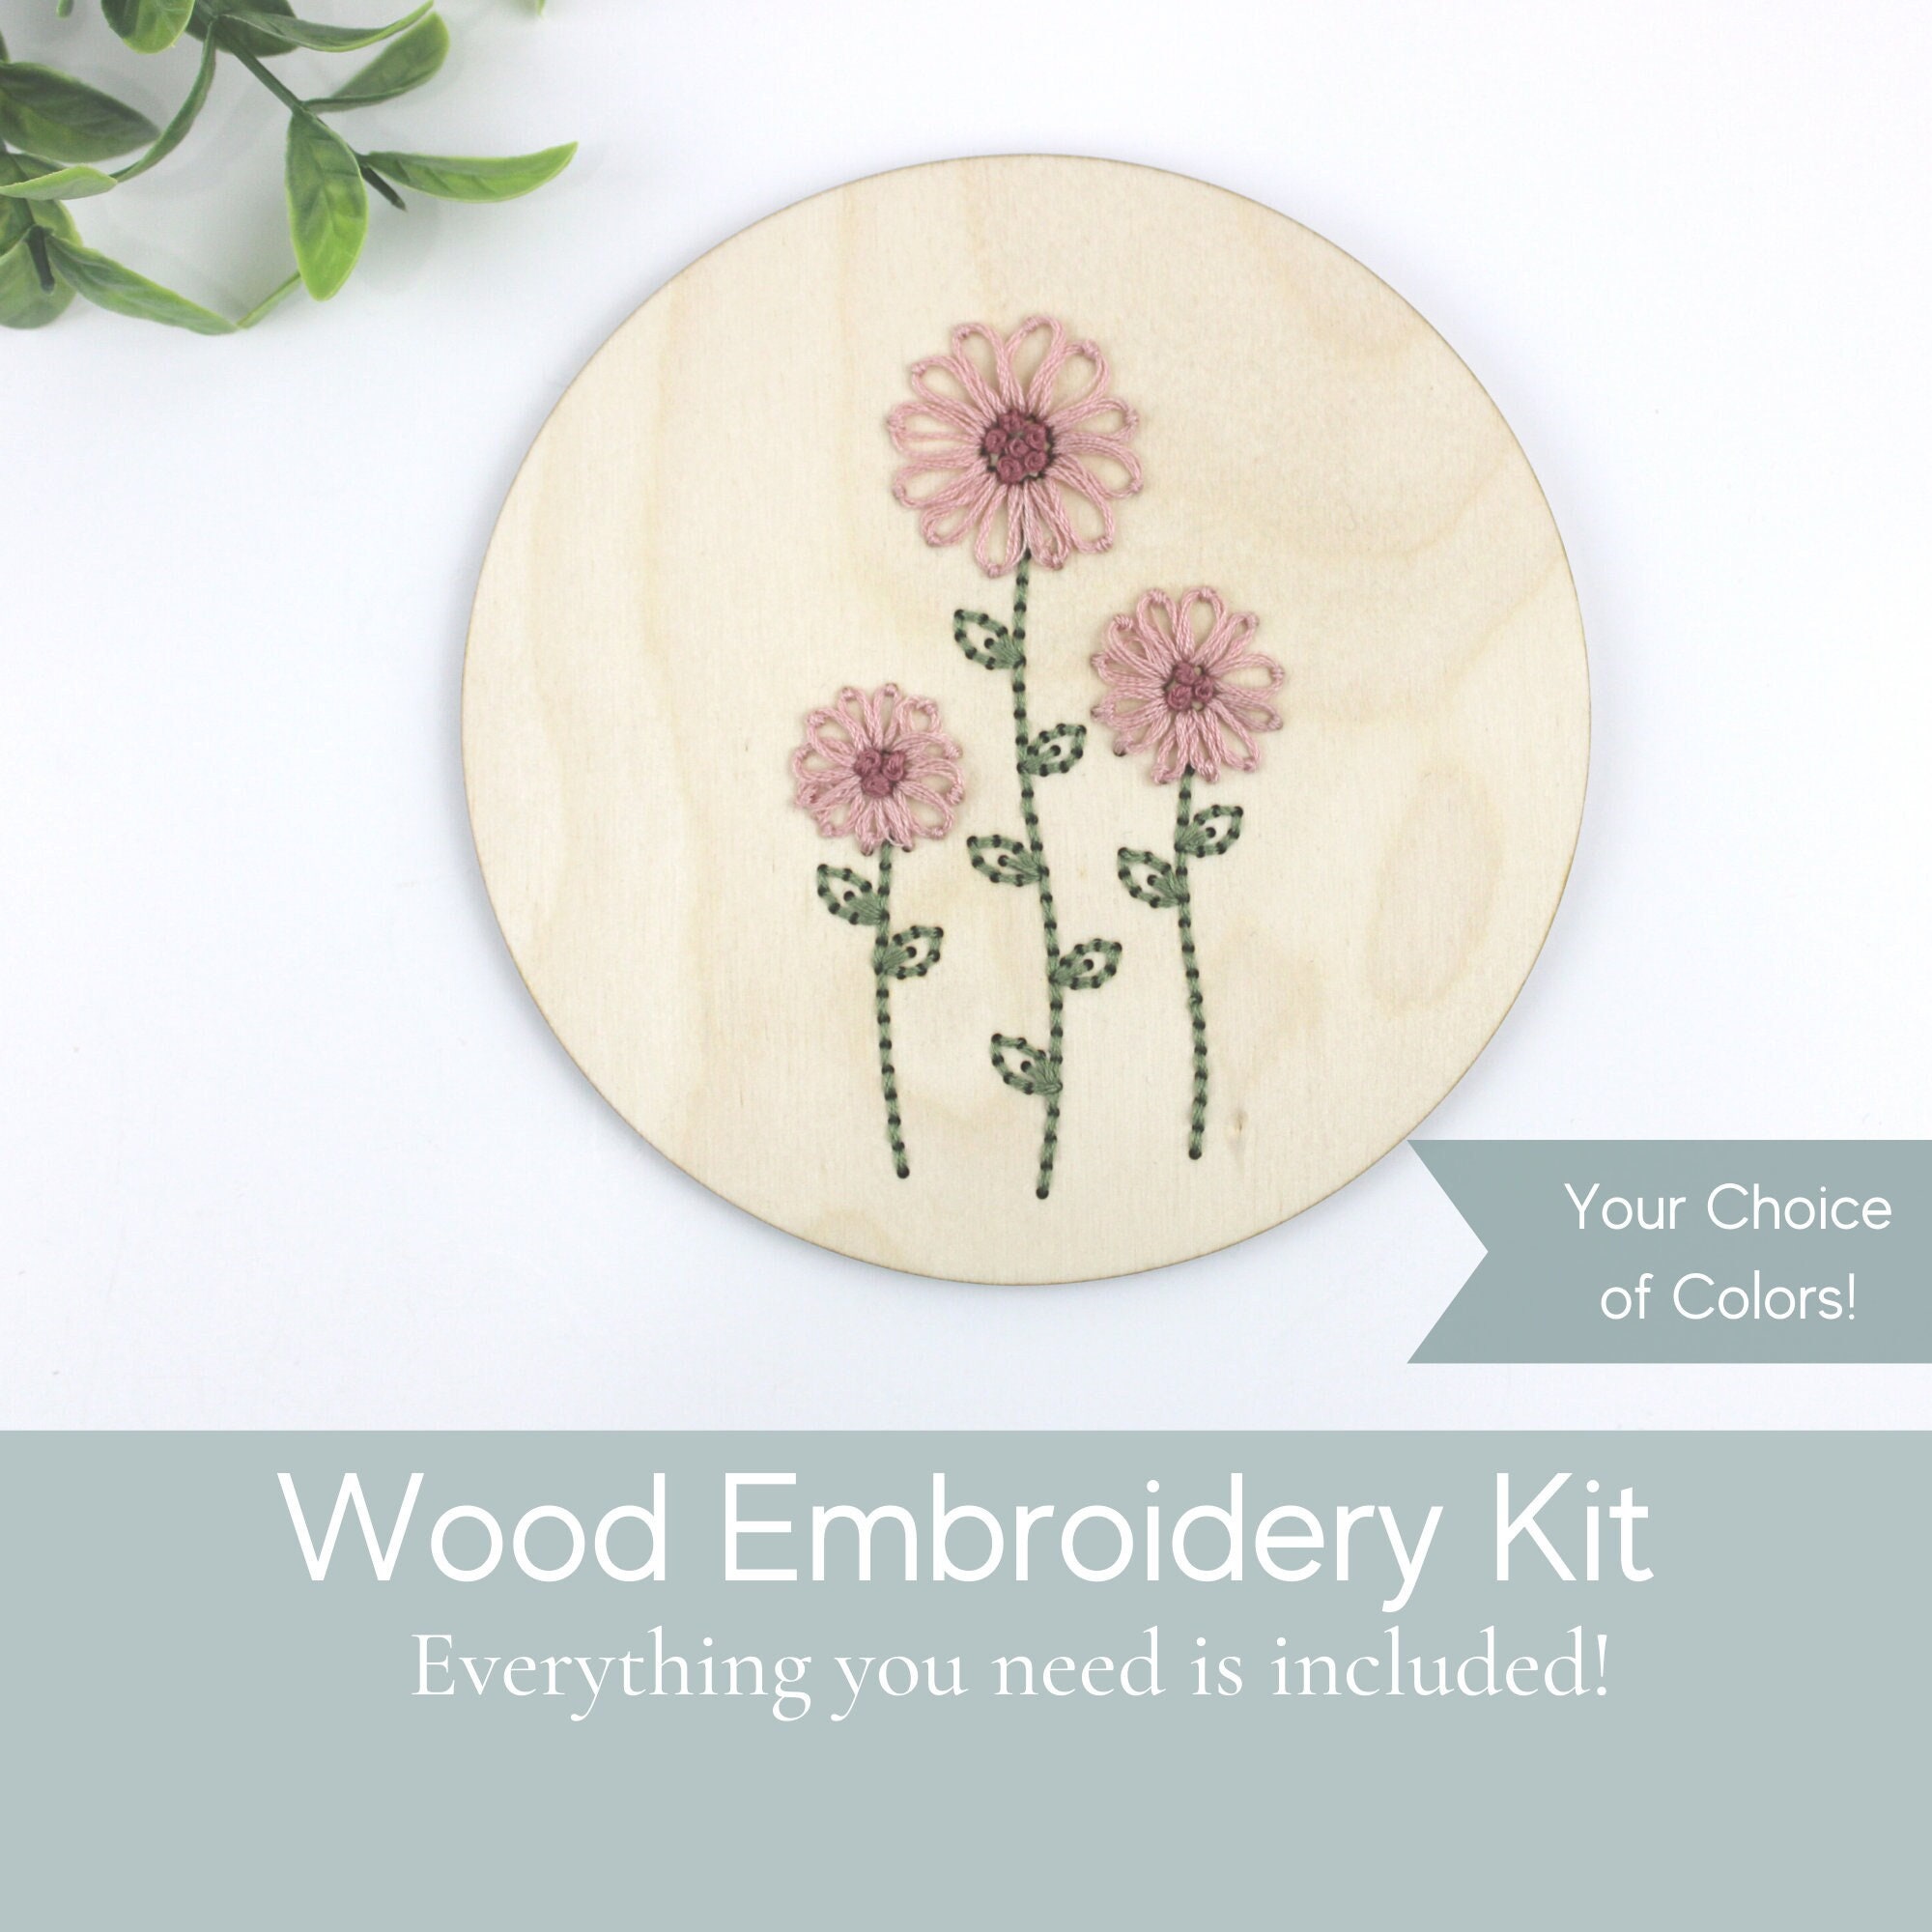 Rose Embroidery Kit, June Flower Embroidery Kit, DIY Embroidery, Birth  Flower Embroidery, Beginner Level, Embroidery How To, Intermediate 